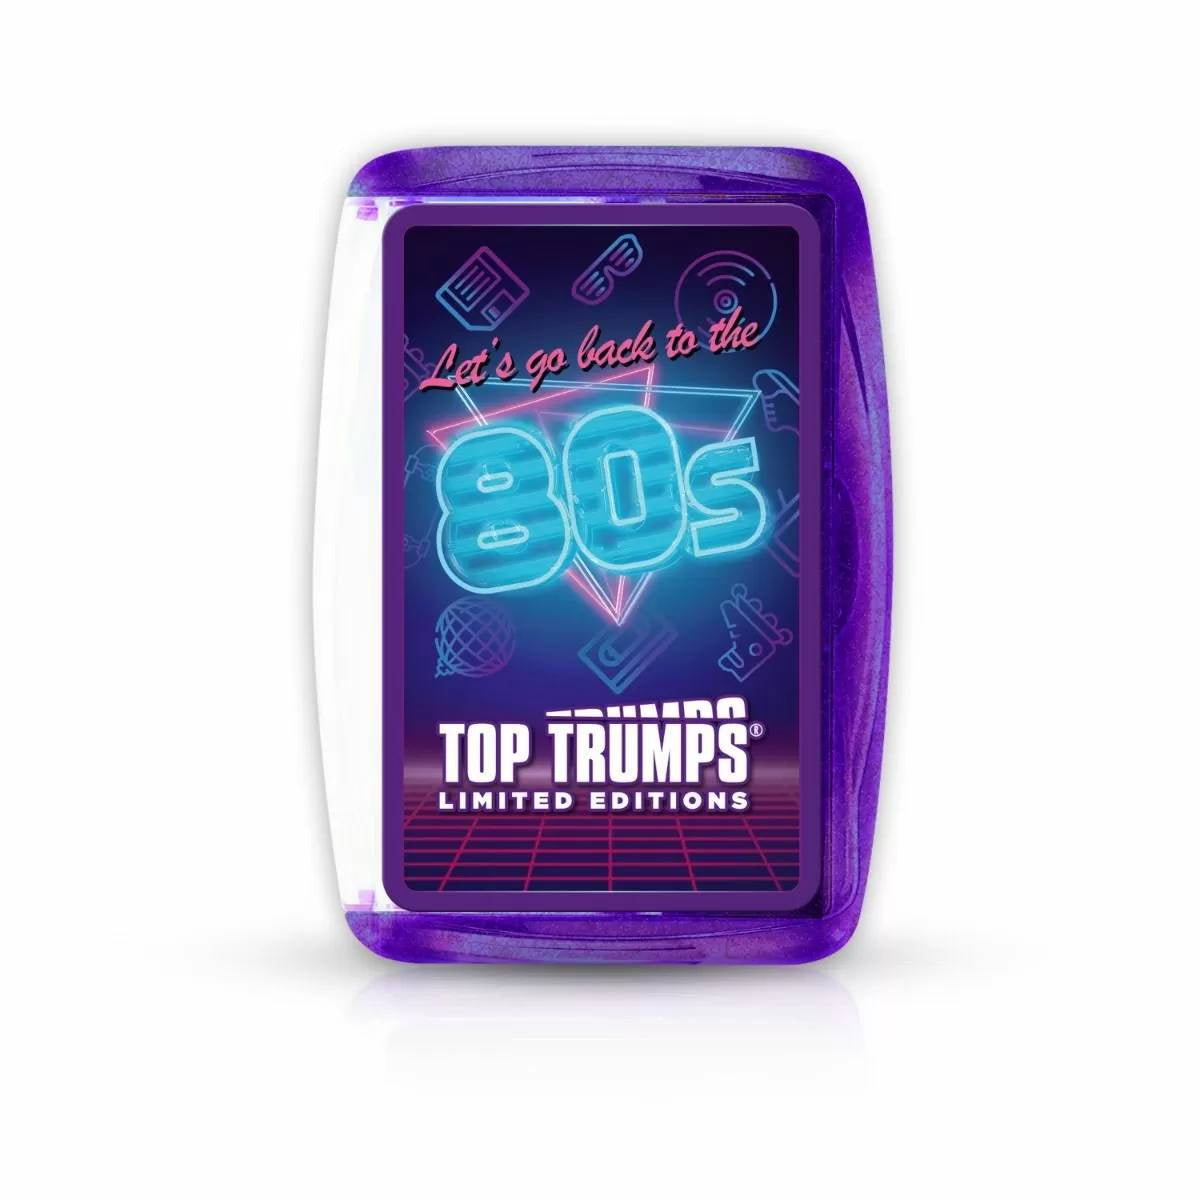 Top Trumps: Lets Go Back to the 80s (Limited Edition)